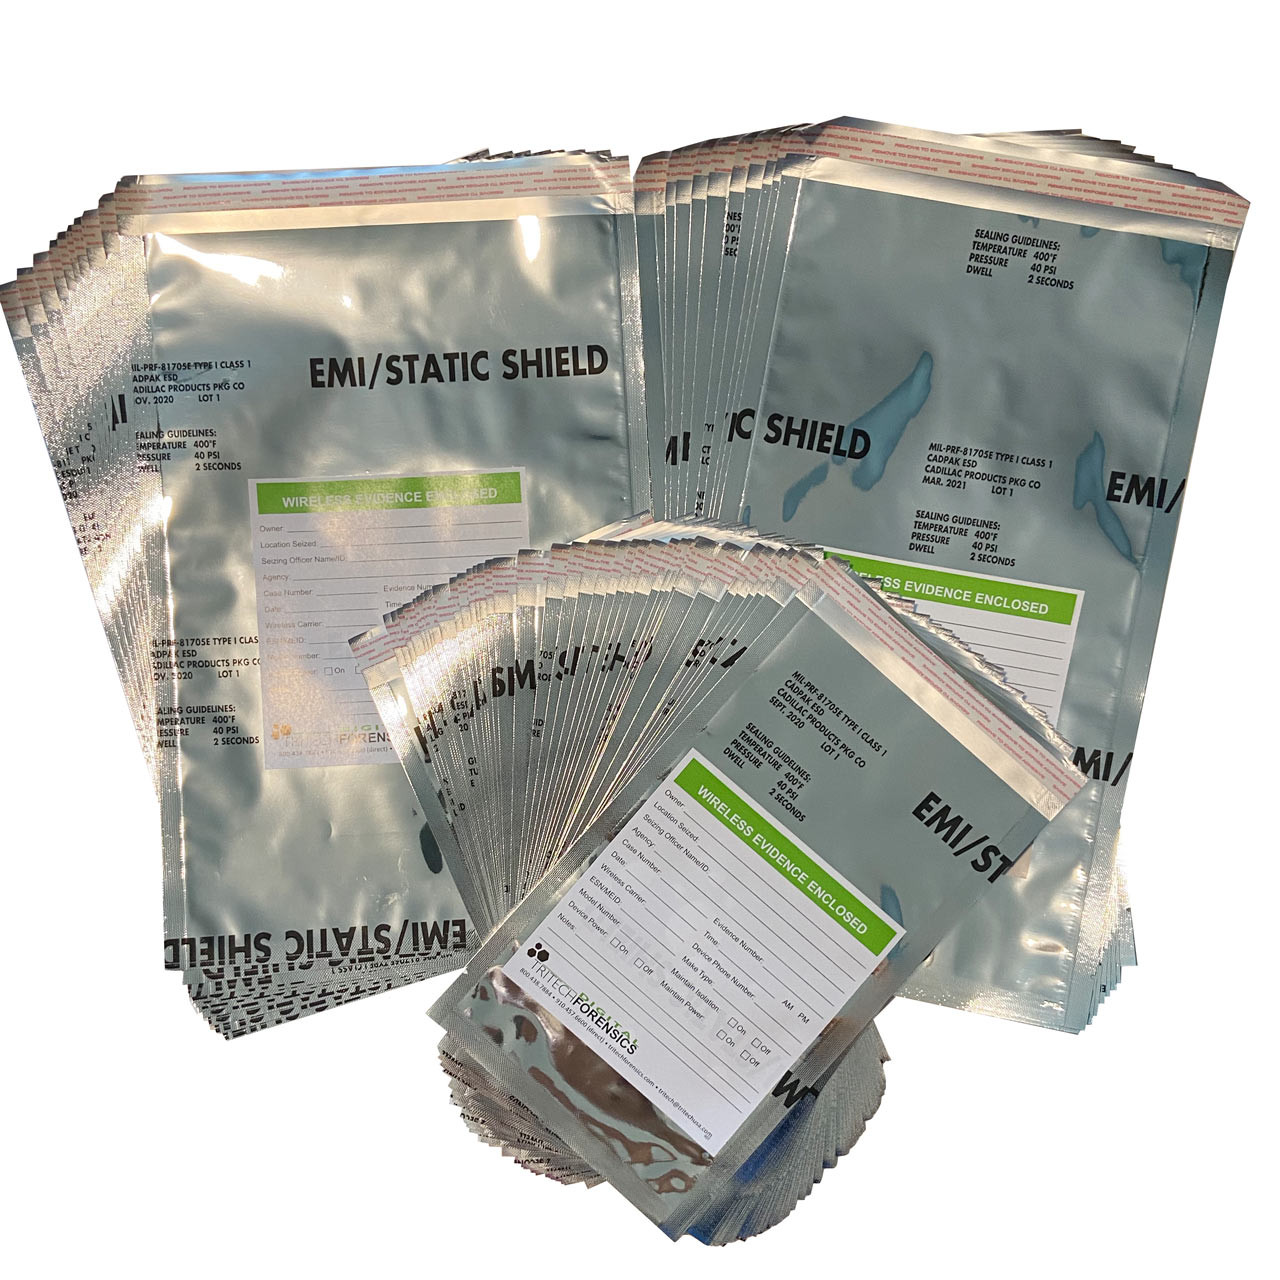 AVAIL Forensics Disposable Faraday Bags - No Label - Large- 10/pkg, 9x13 -  AF DAVE